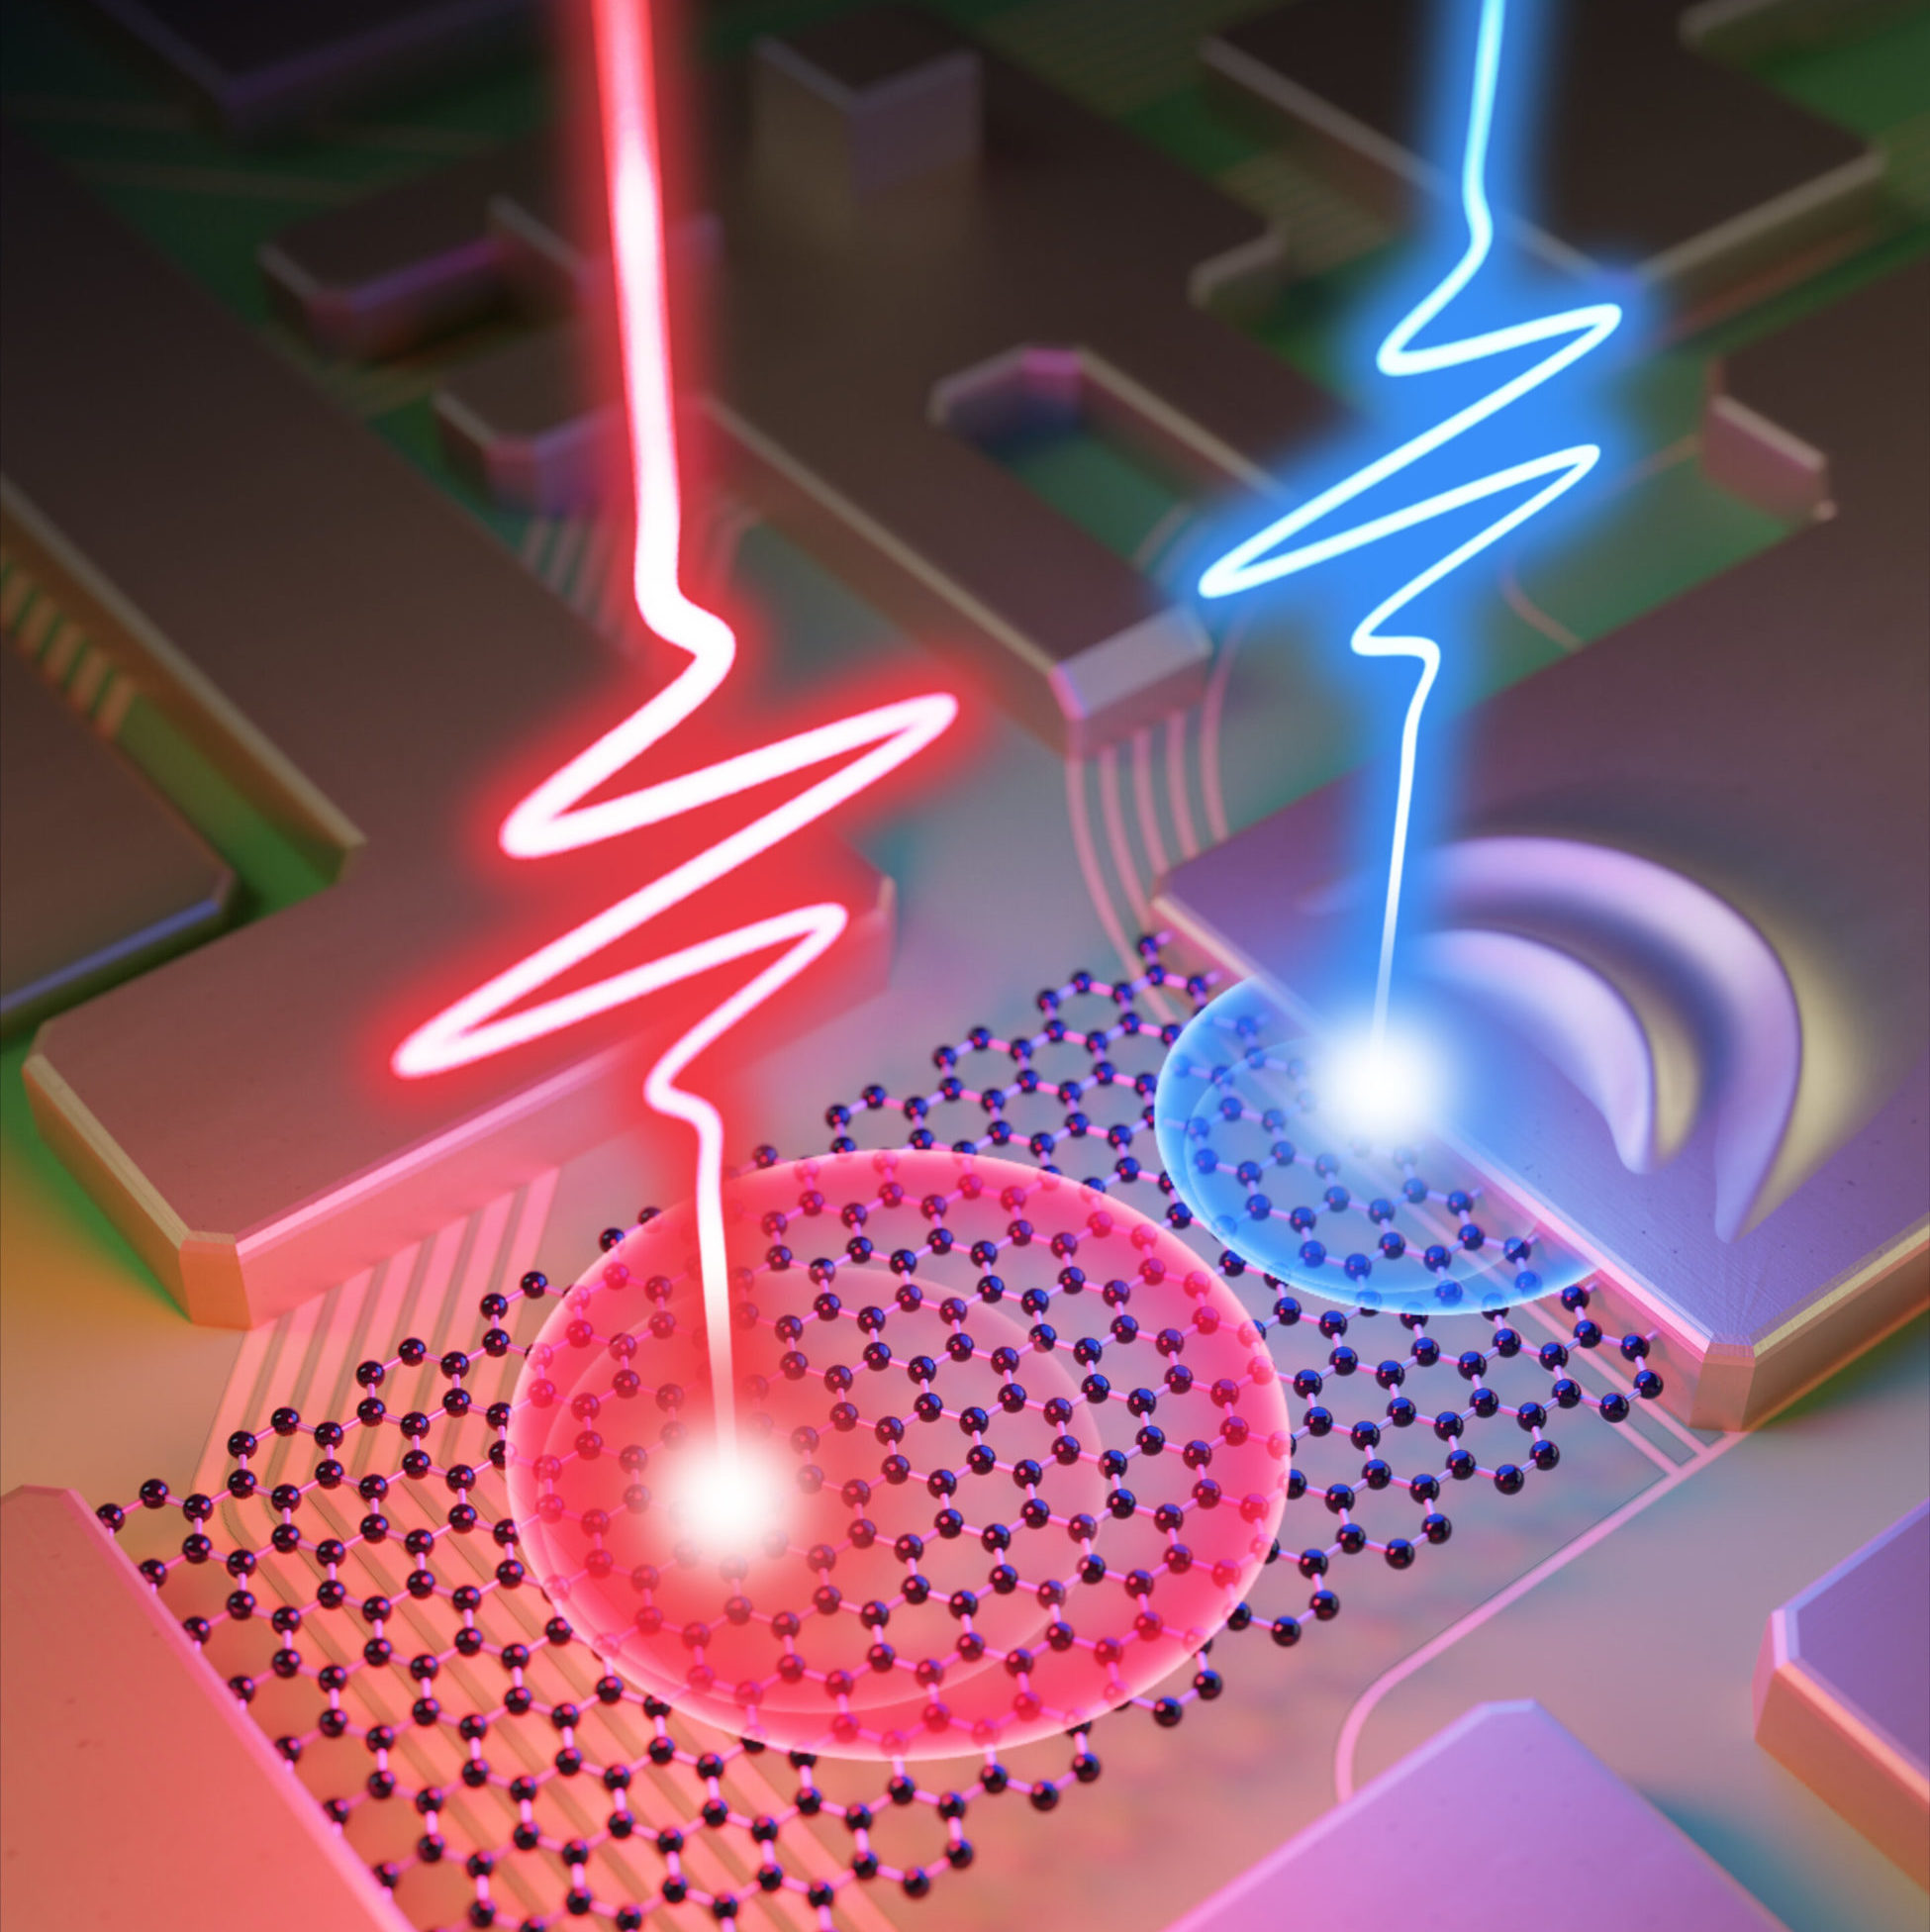 Synchronized laser pulses (red and blue) generate a burst of real and virtual charge carriers in graphene that are absorbed by gold metal to produce a net current